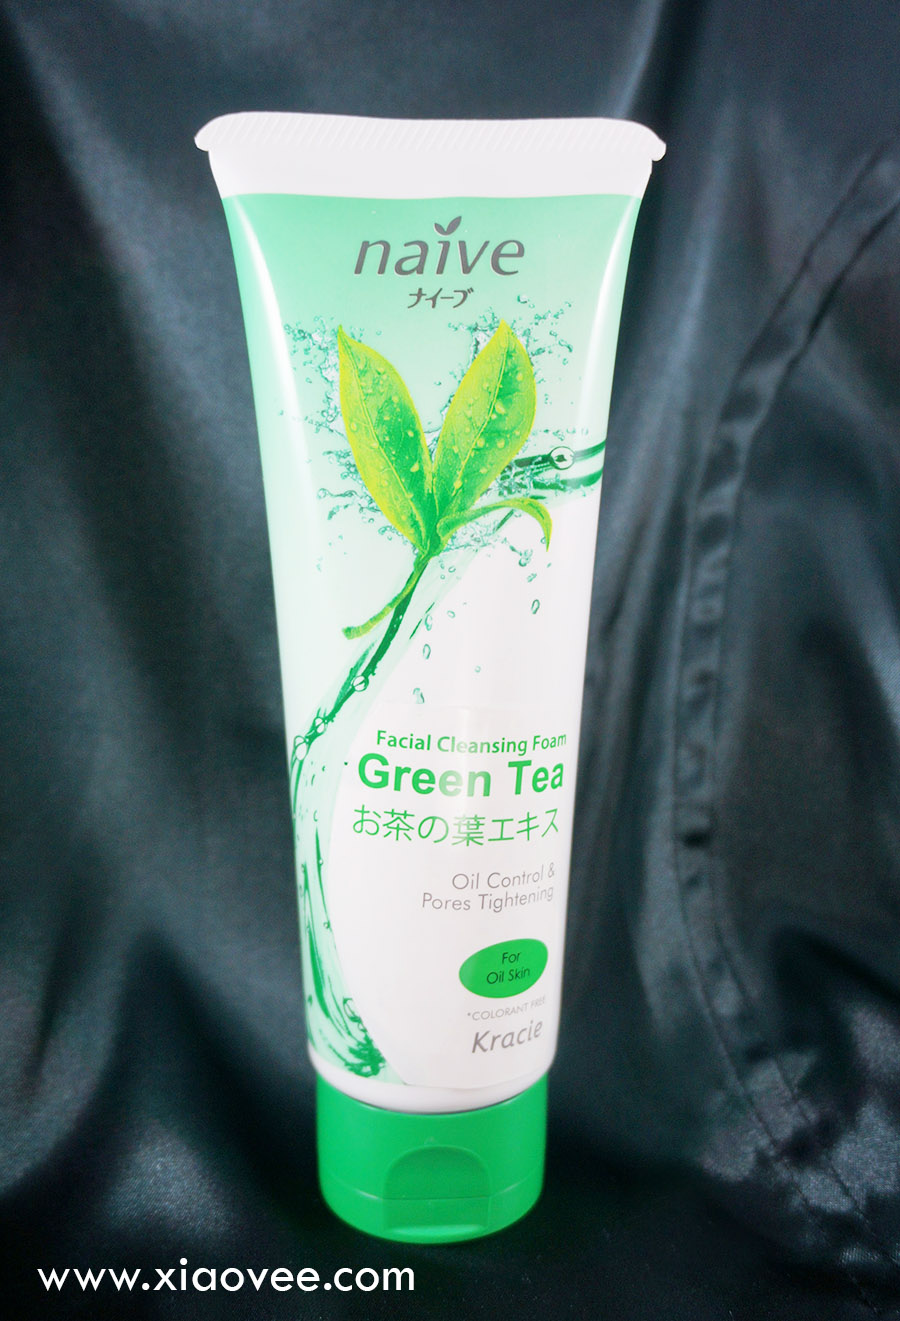 Naive cleansing foam